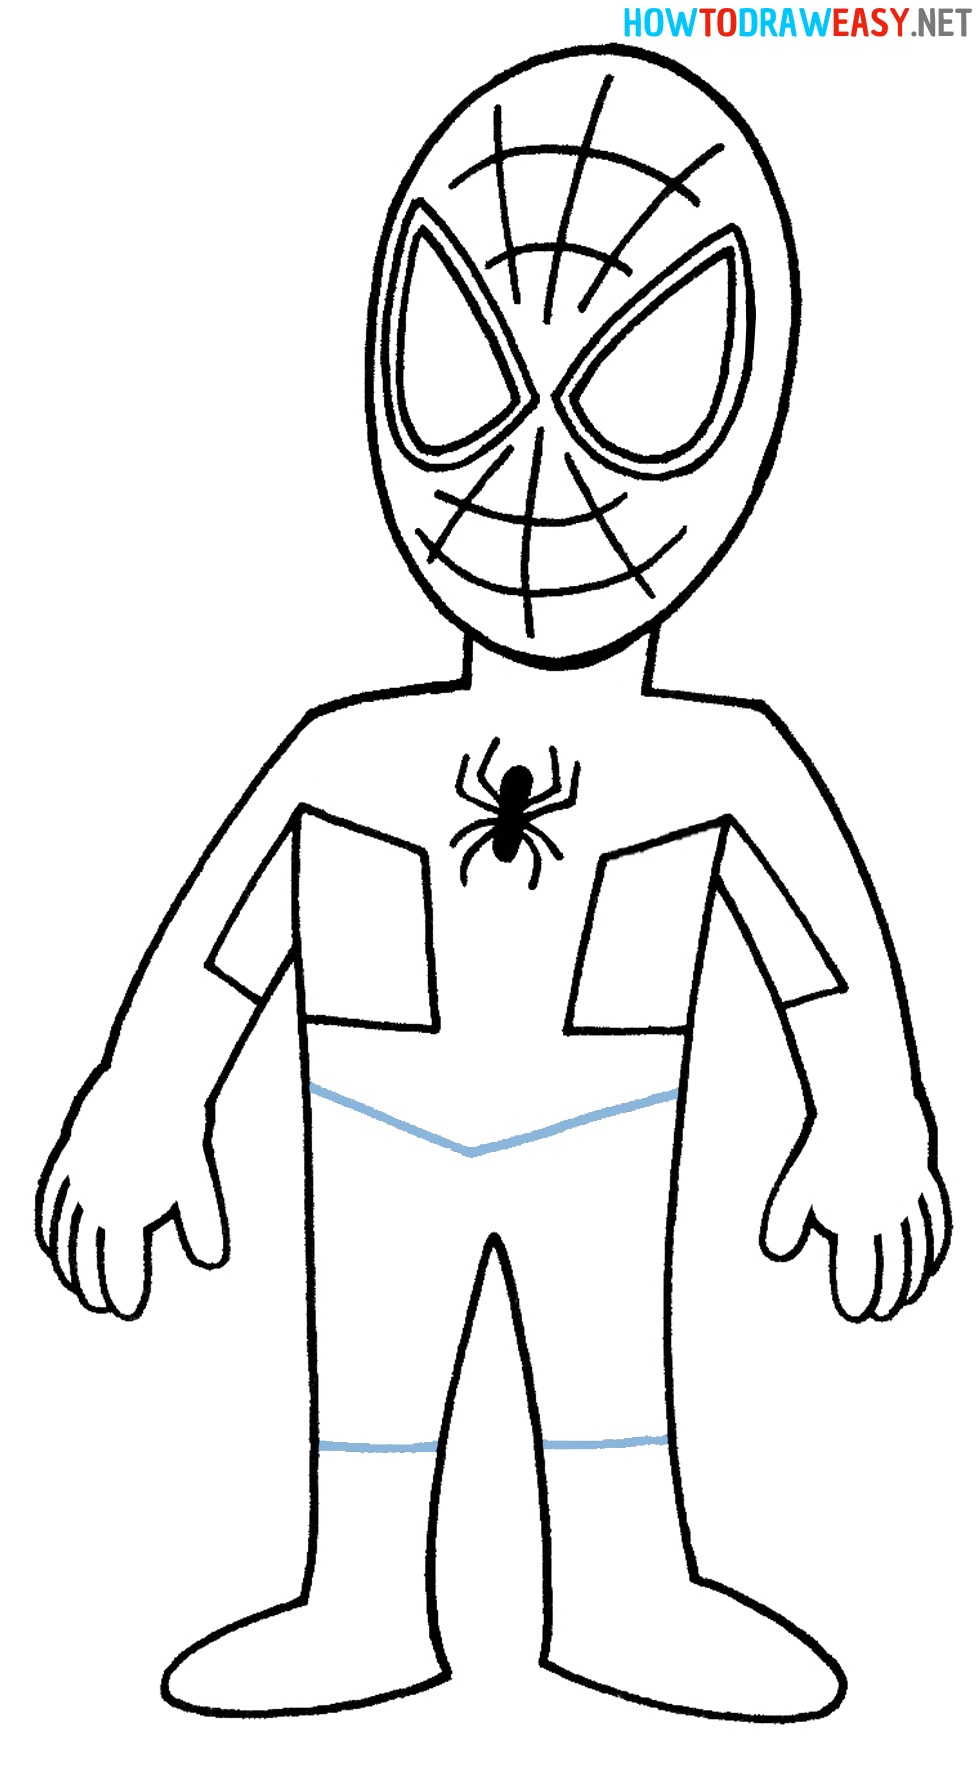 How to Draw Spiderman simple